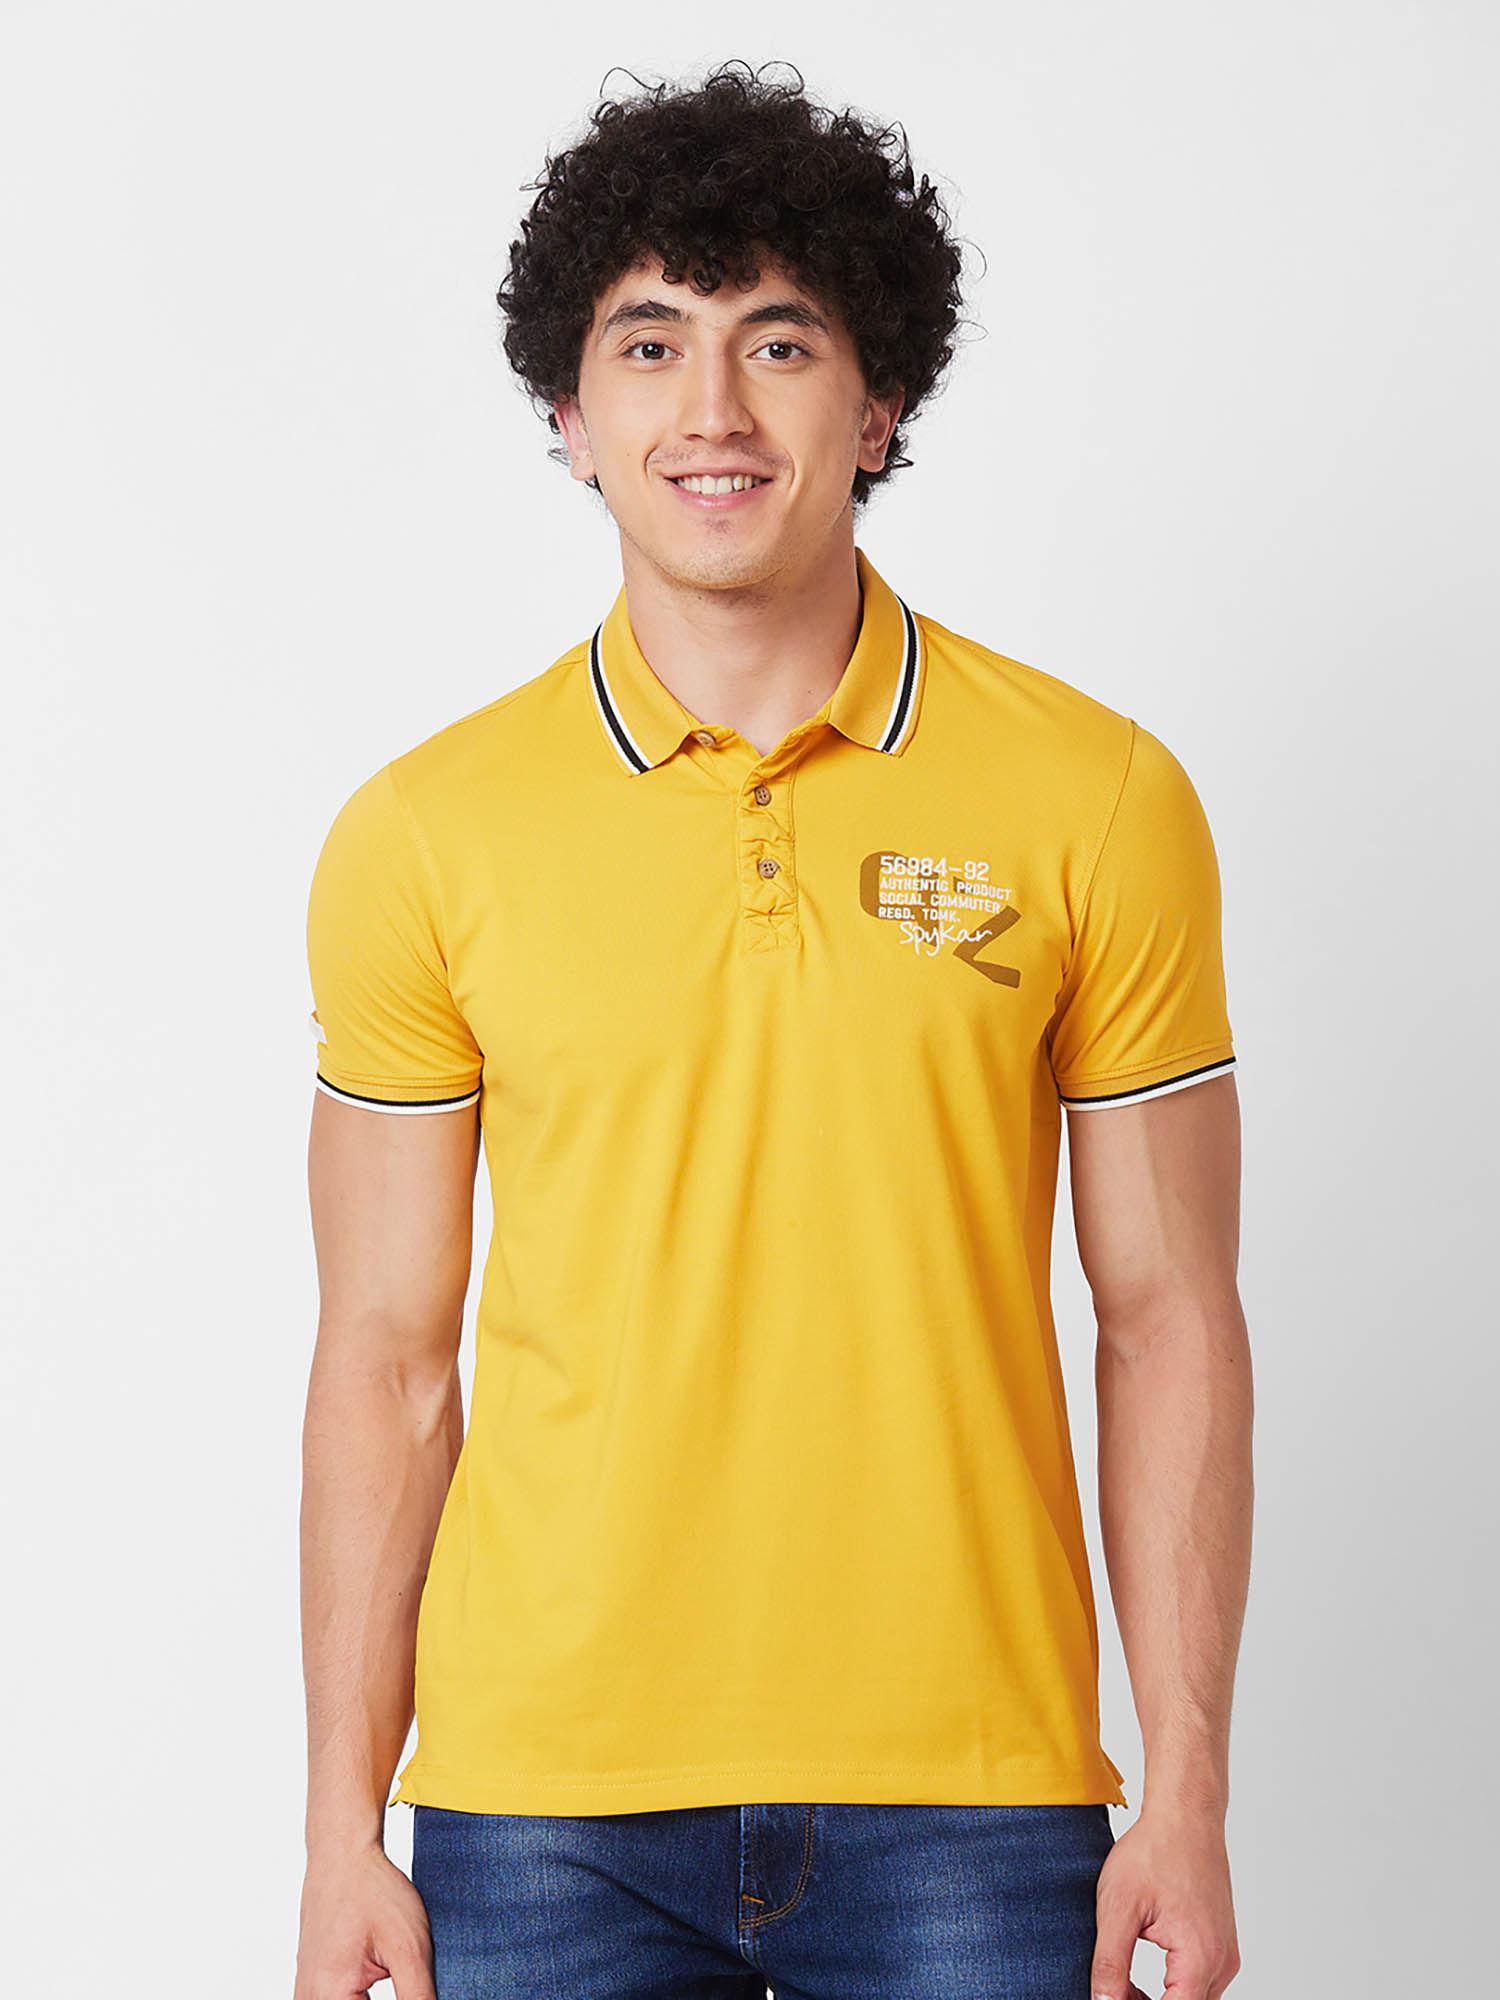 slim-fit-yellow-polo-t-shirt-for-men